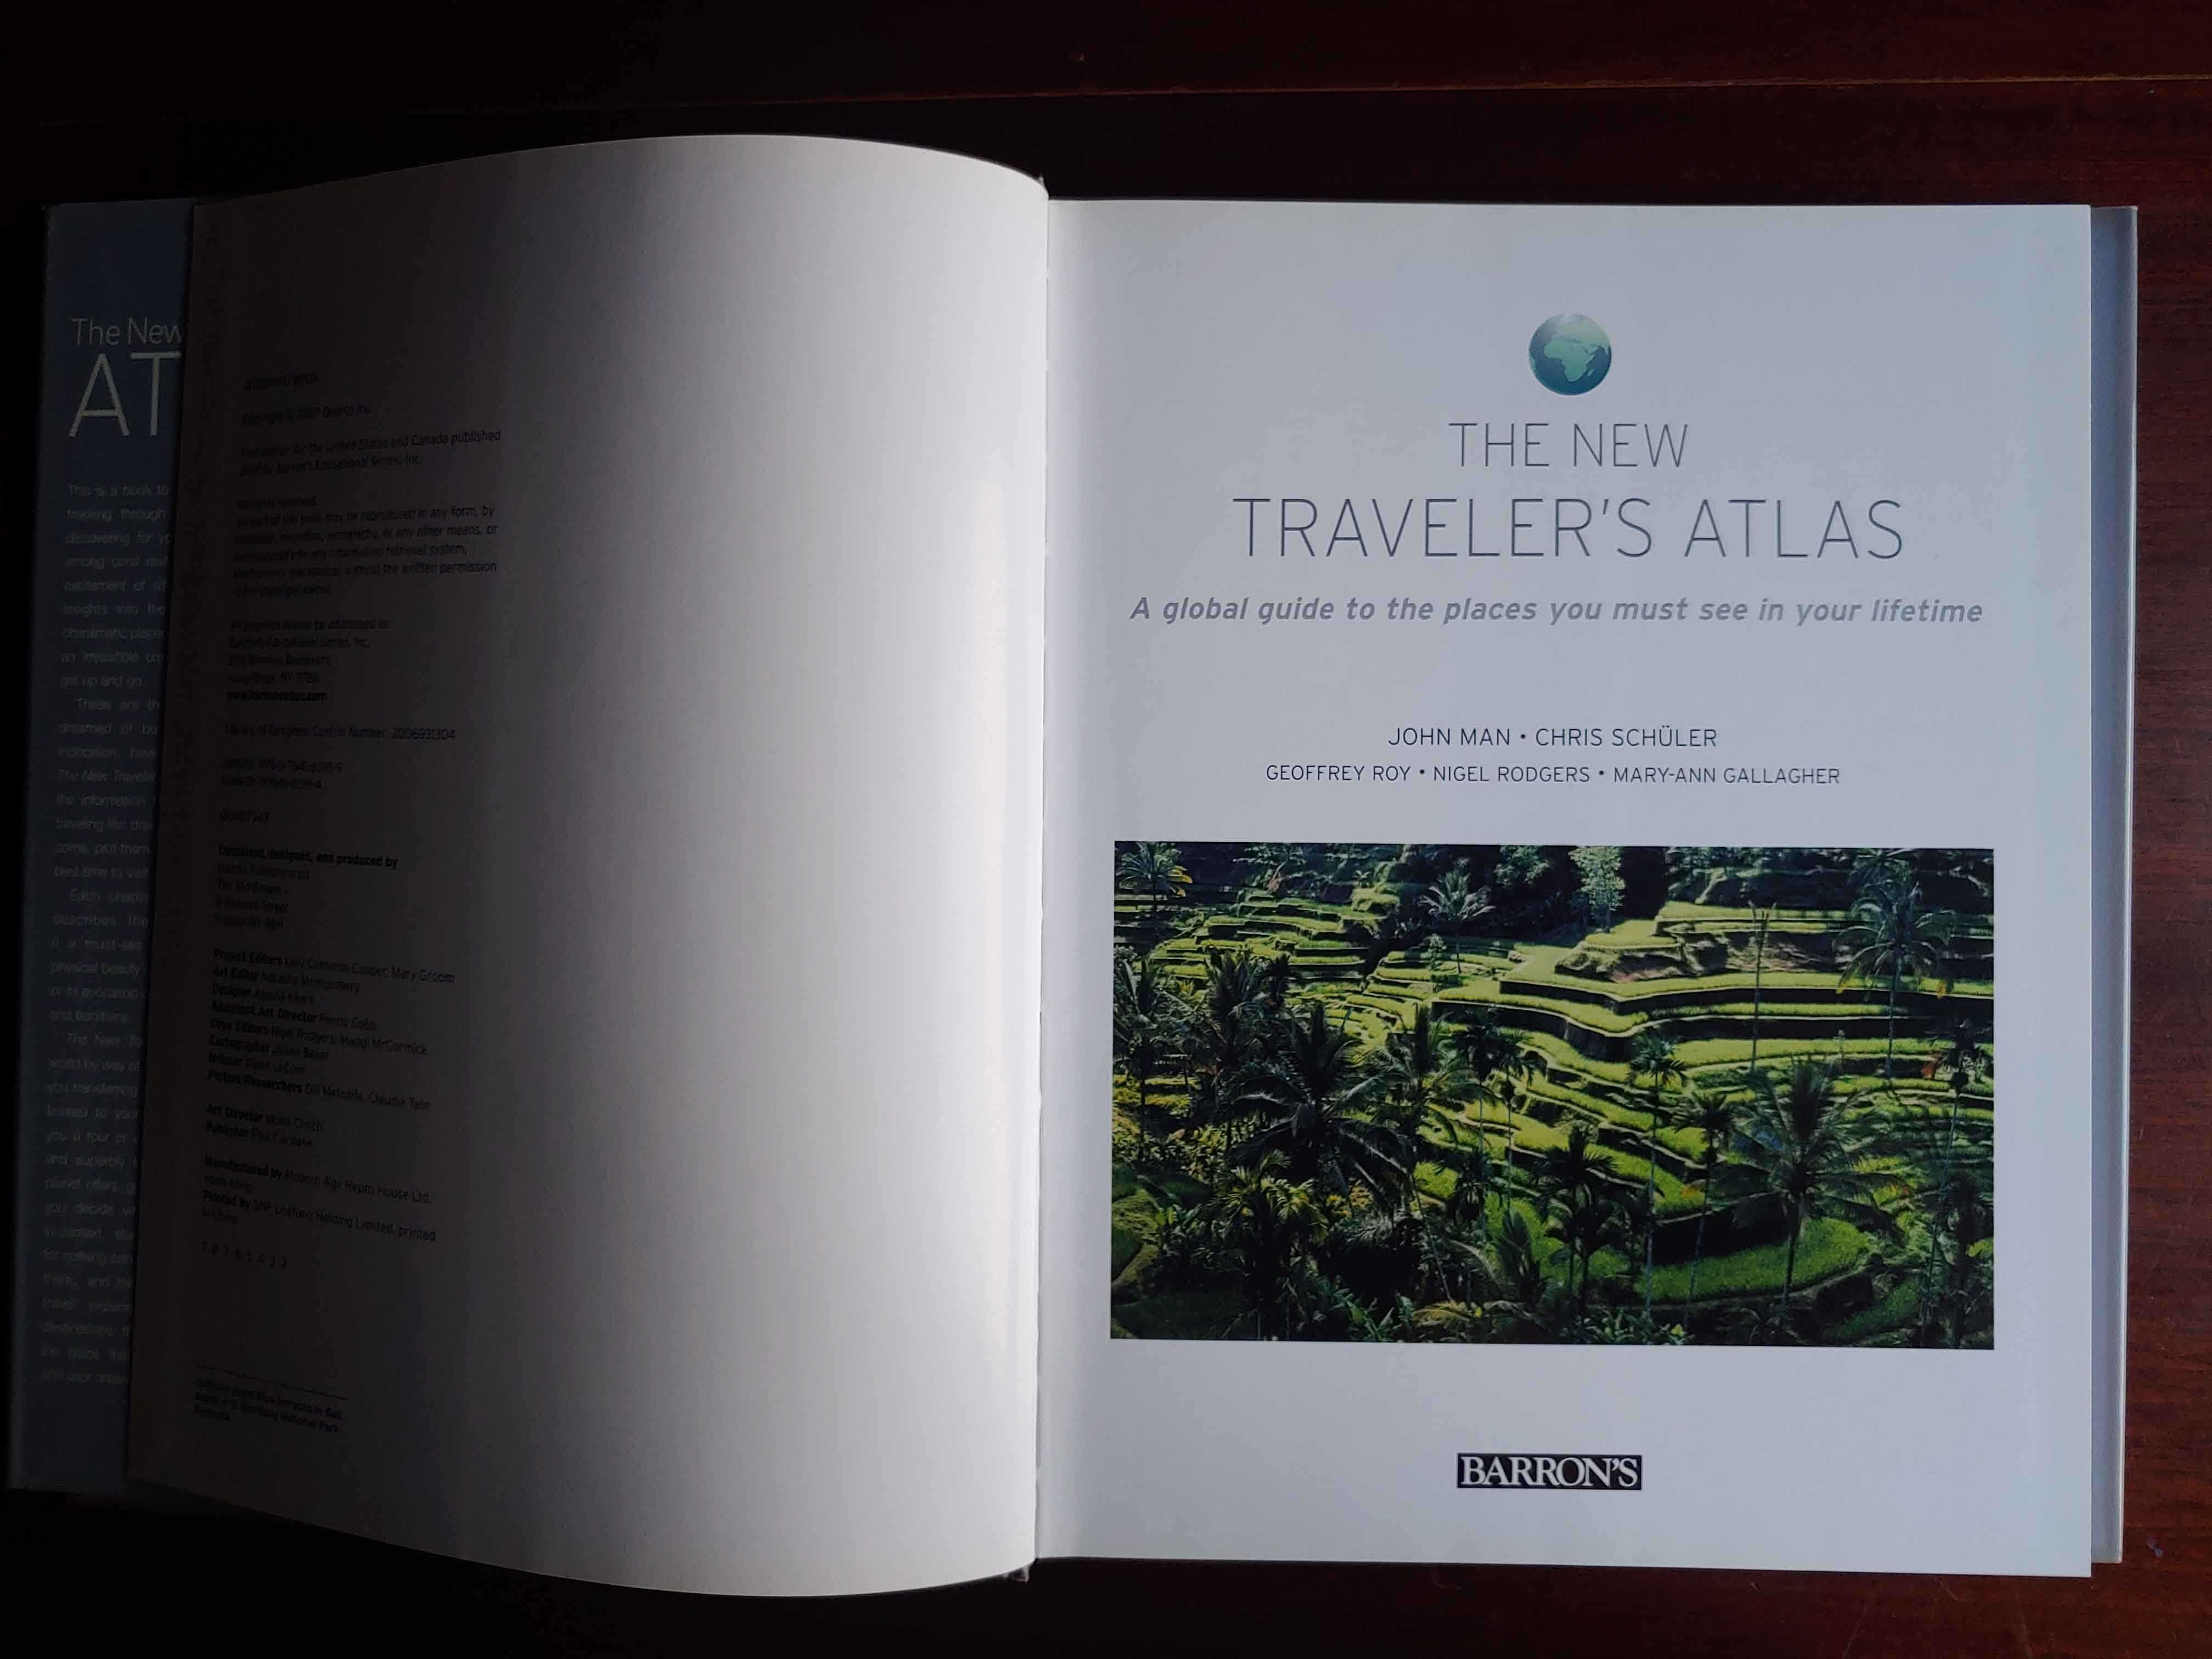 The New Traveler's ATLAS - A global guide to the places you must see